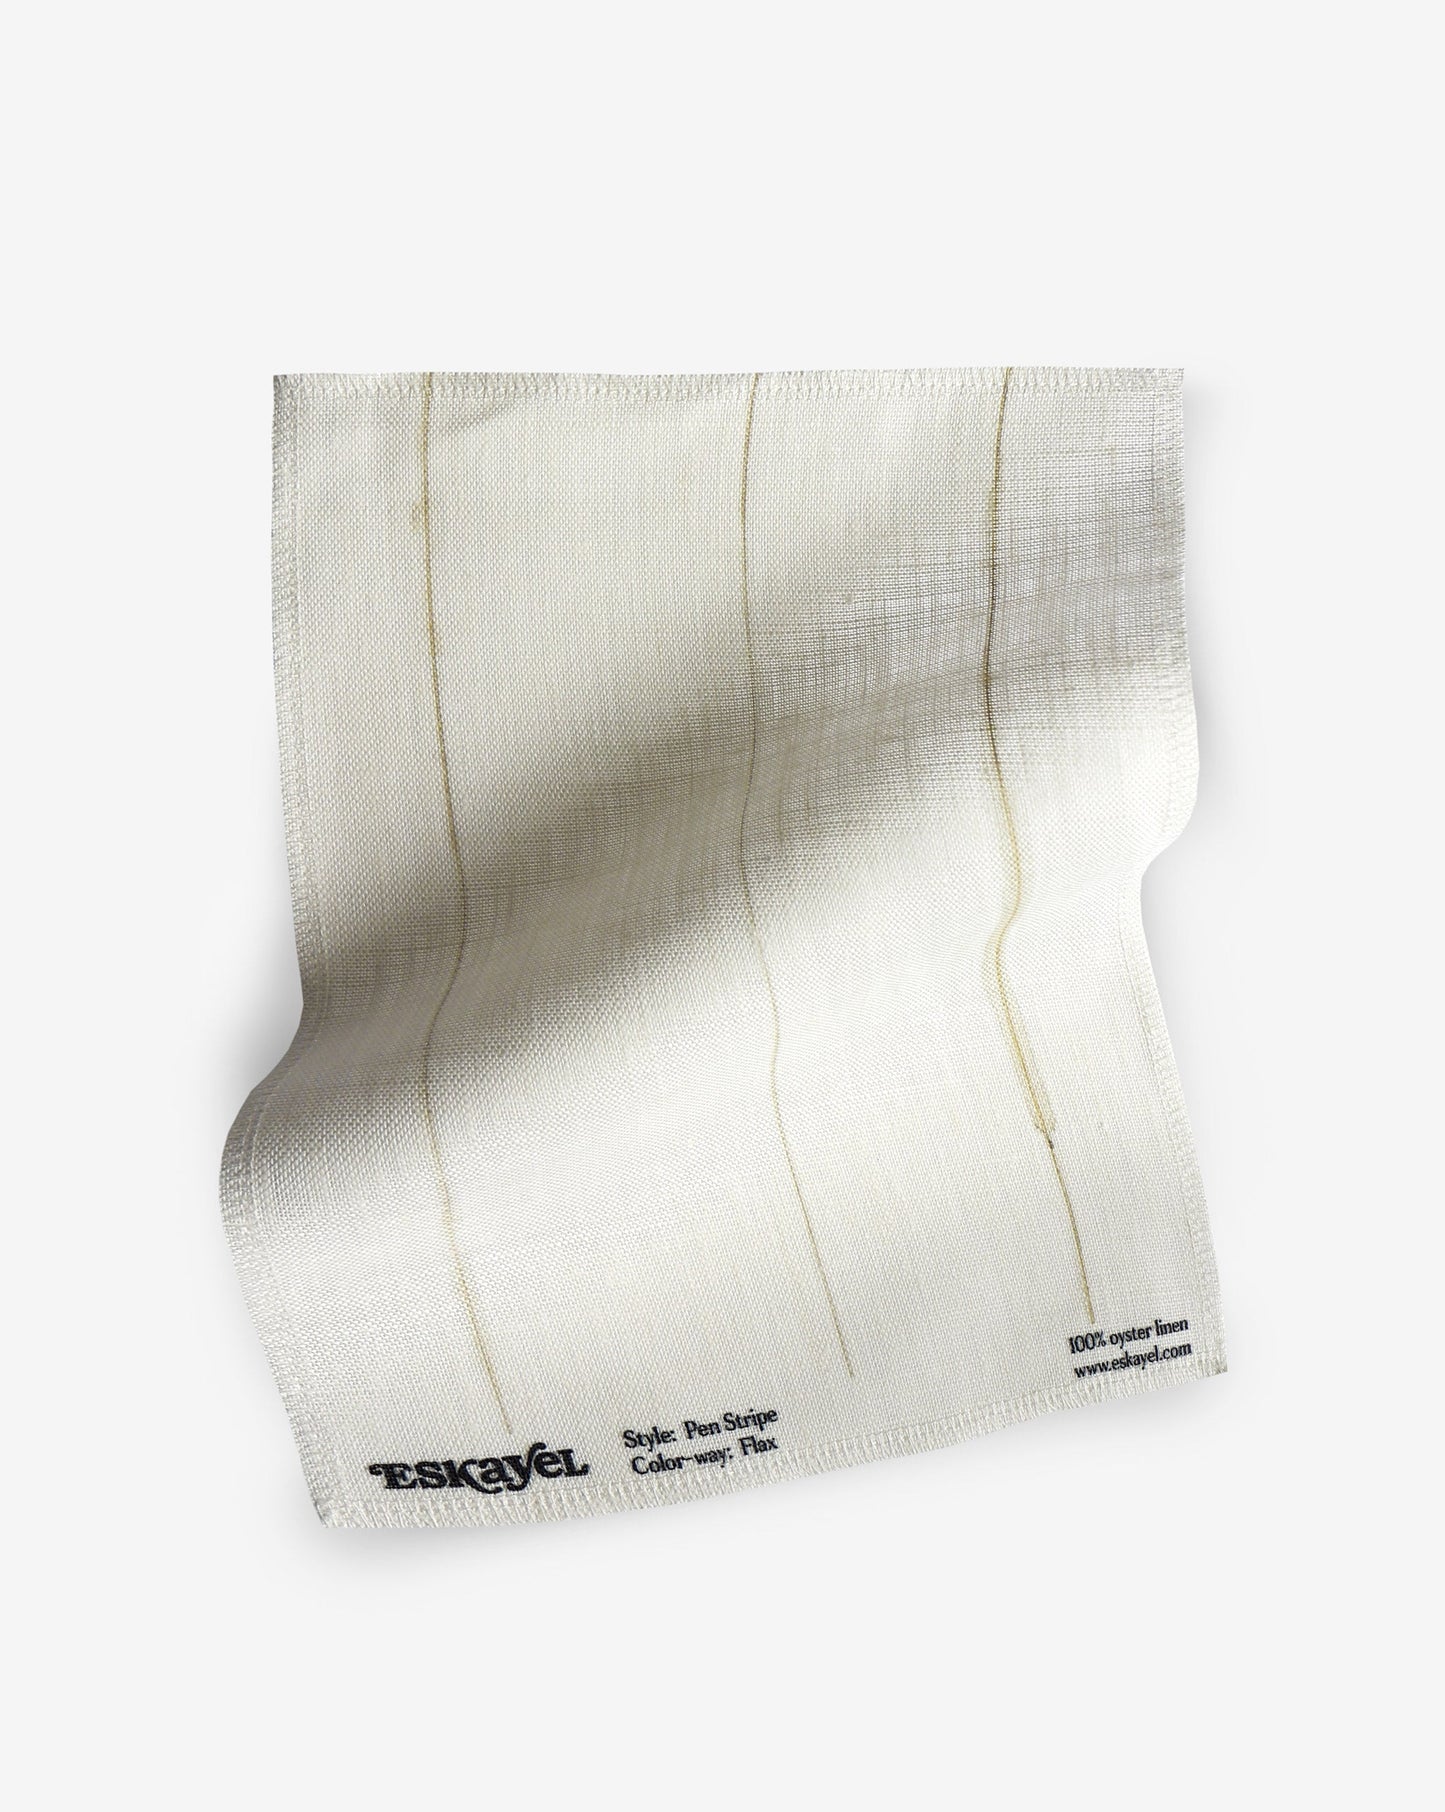 Order a white Pen Stripe Fabric Sample||Flax towel with a black stripe on it.